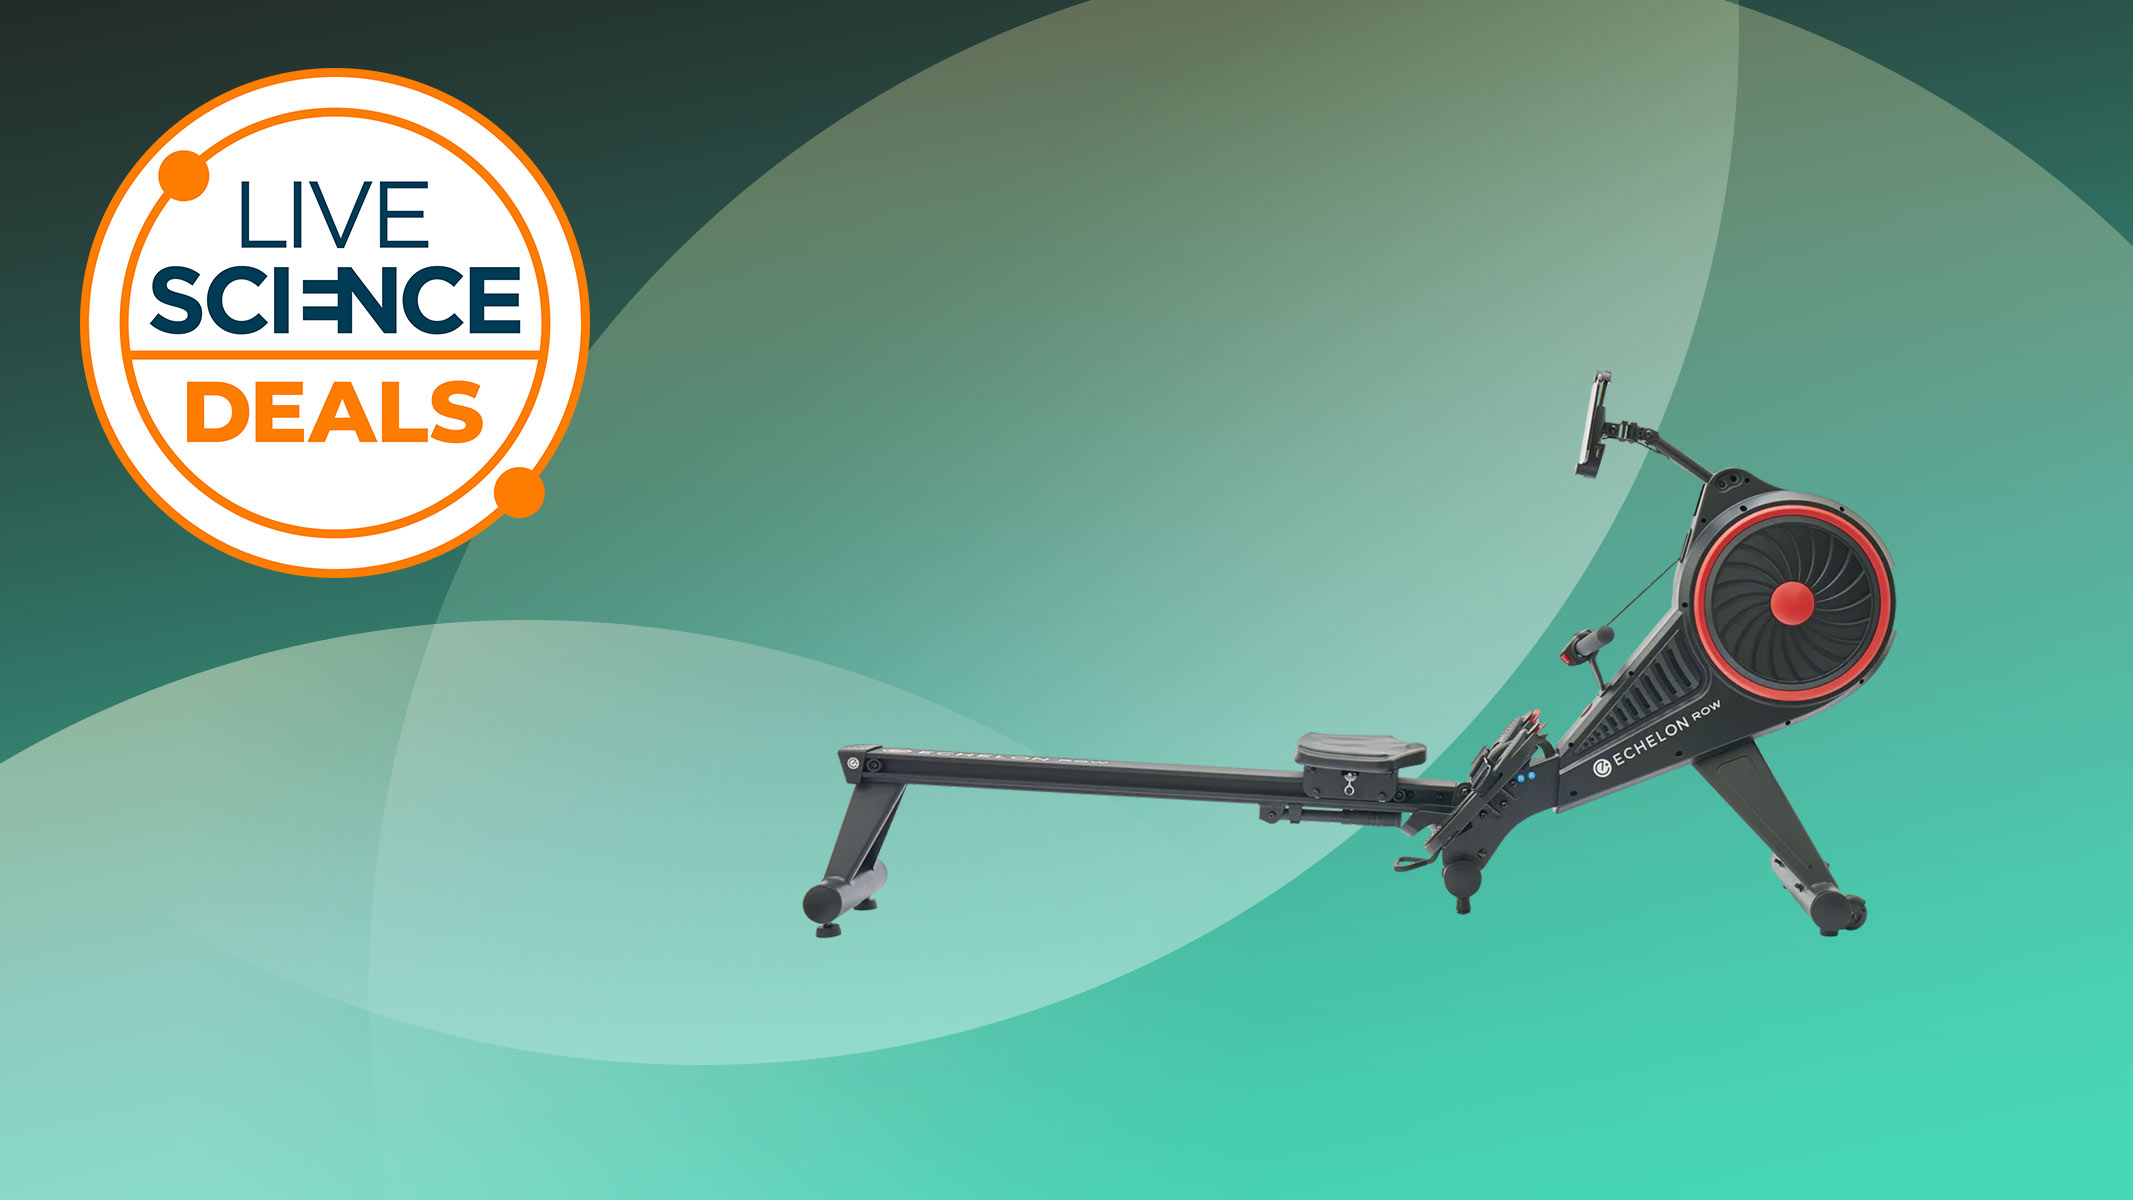  Save $400 on our favorite foldable rowing machine with this Black Friday in July Sale deal 